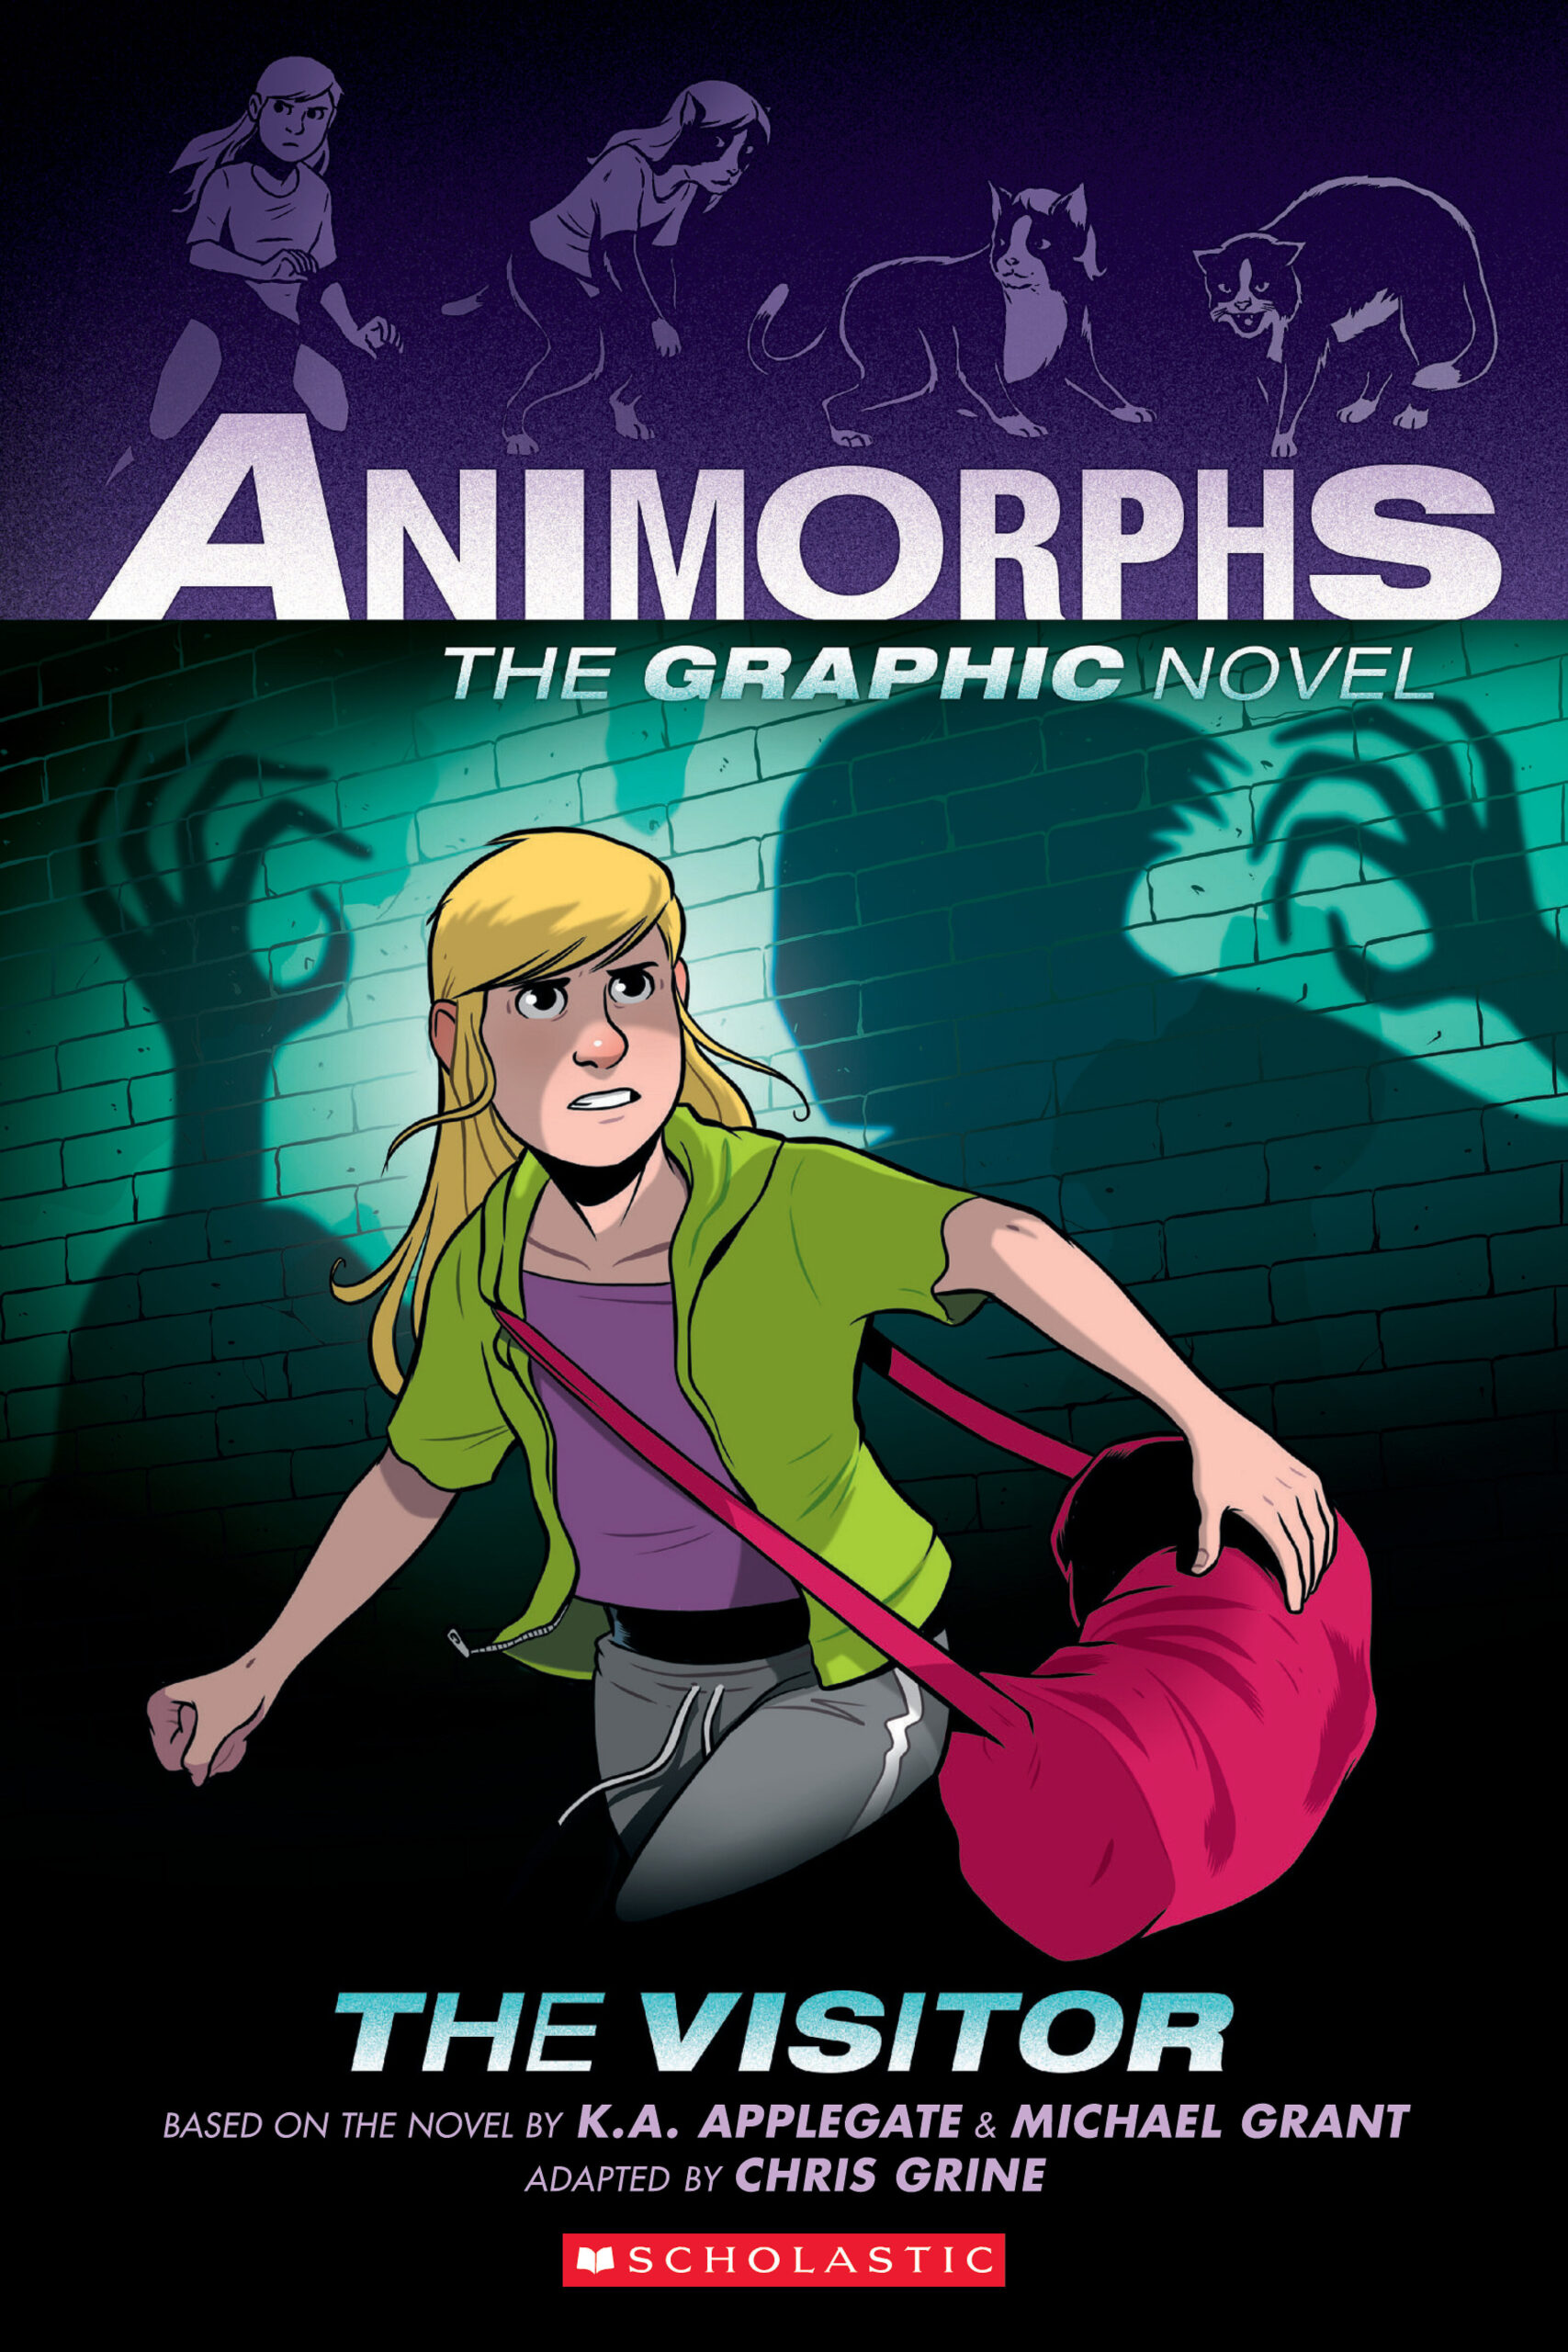 The Visitor (Animorphs Graphix #2) by K.A. Applegate, Michael Grant, Chris Grine